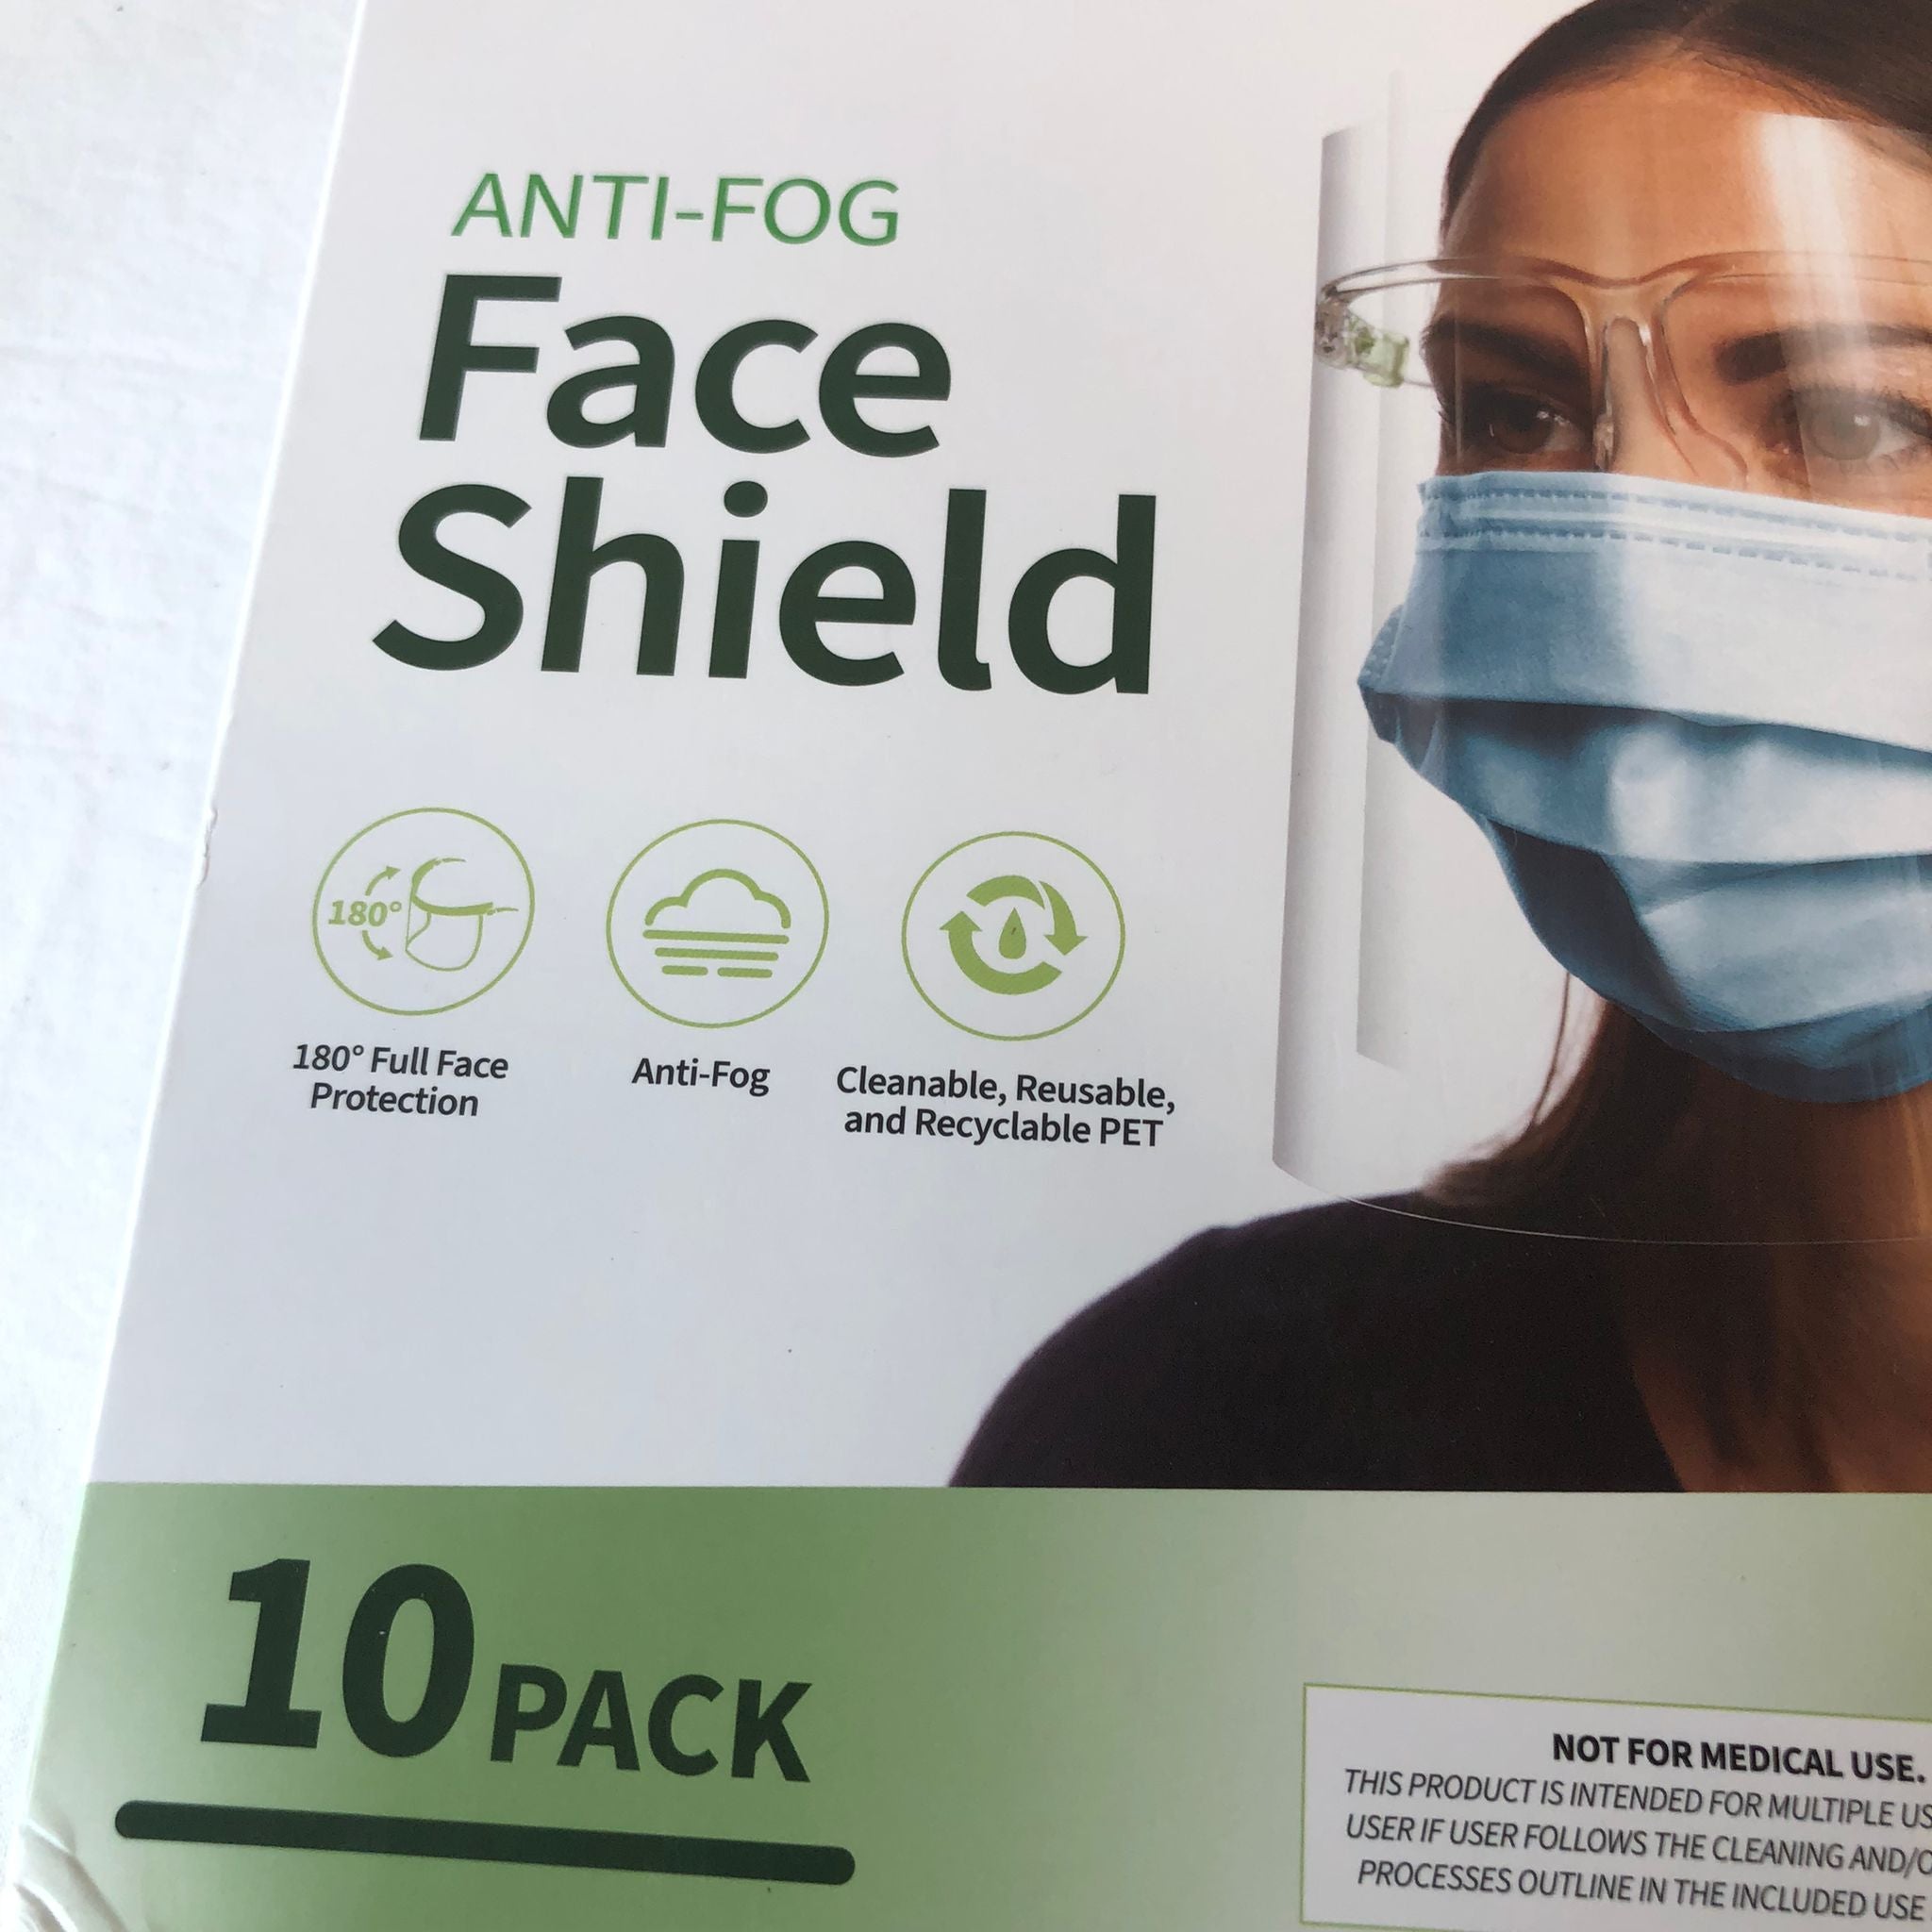 FLTR Pure Protection Anti-Fog Face Shield - Pack of 10 Unopened